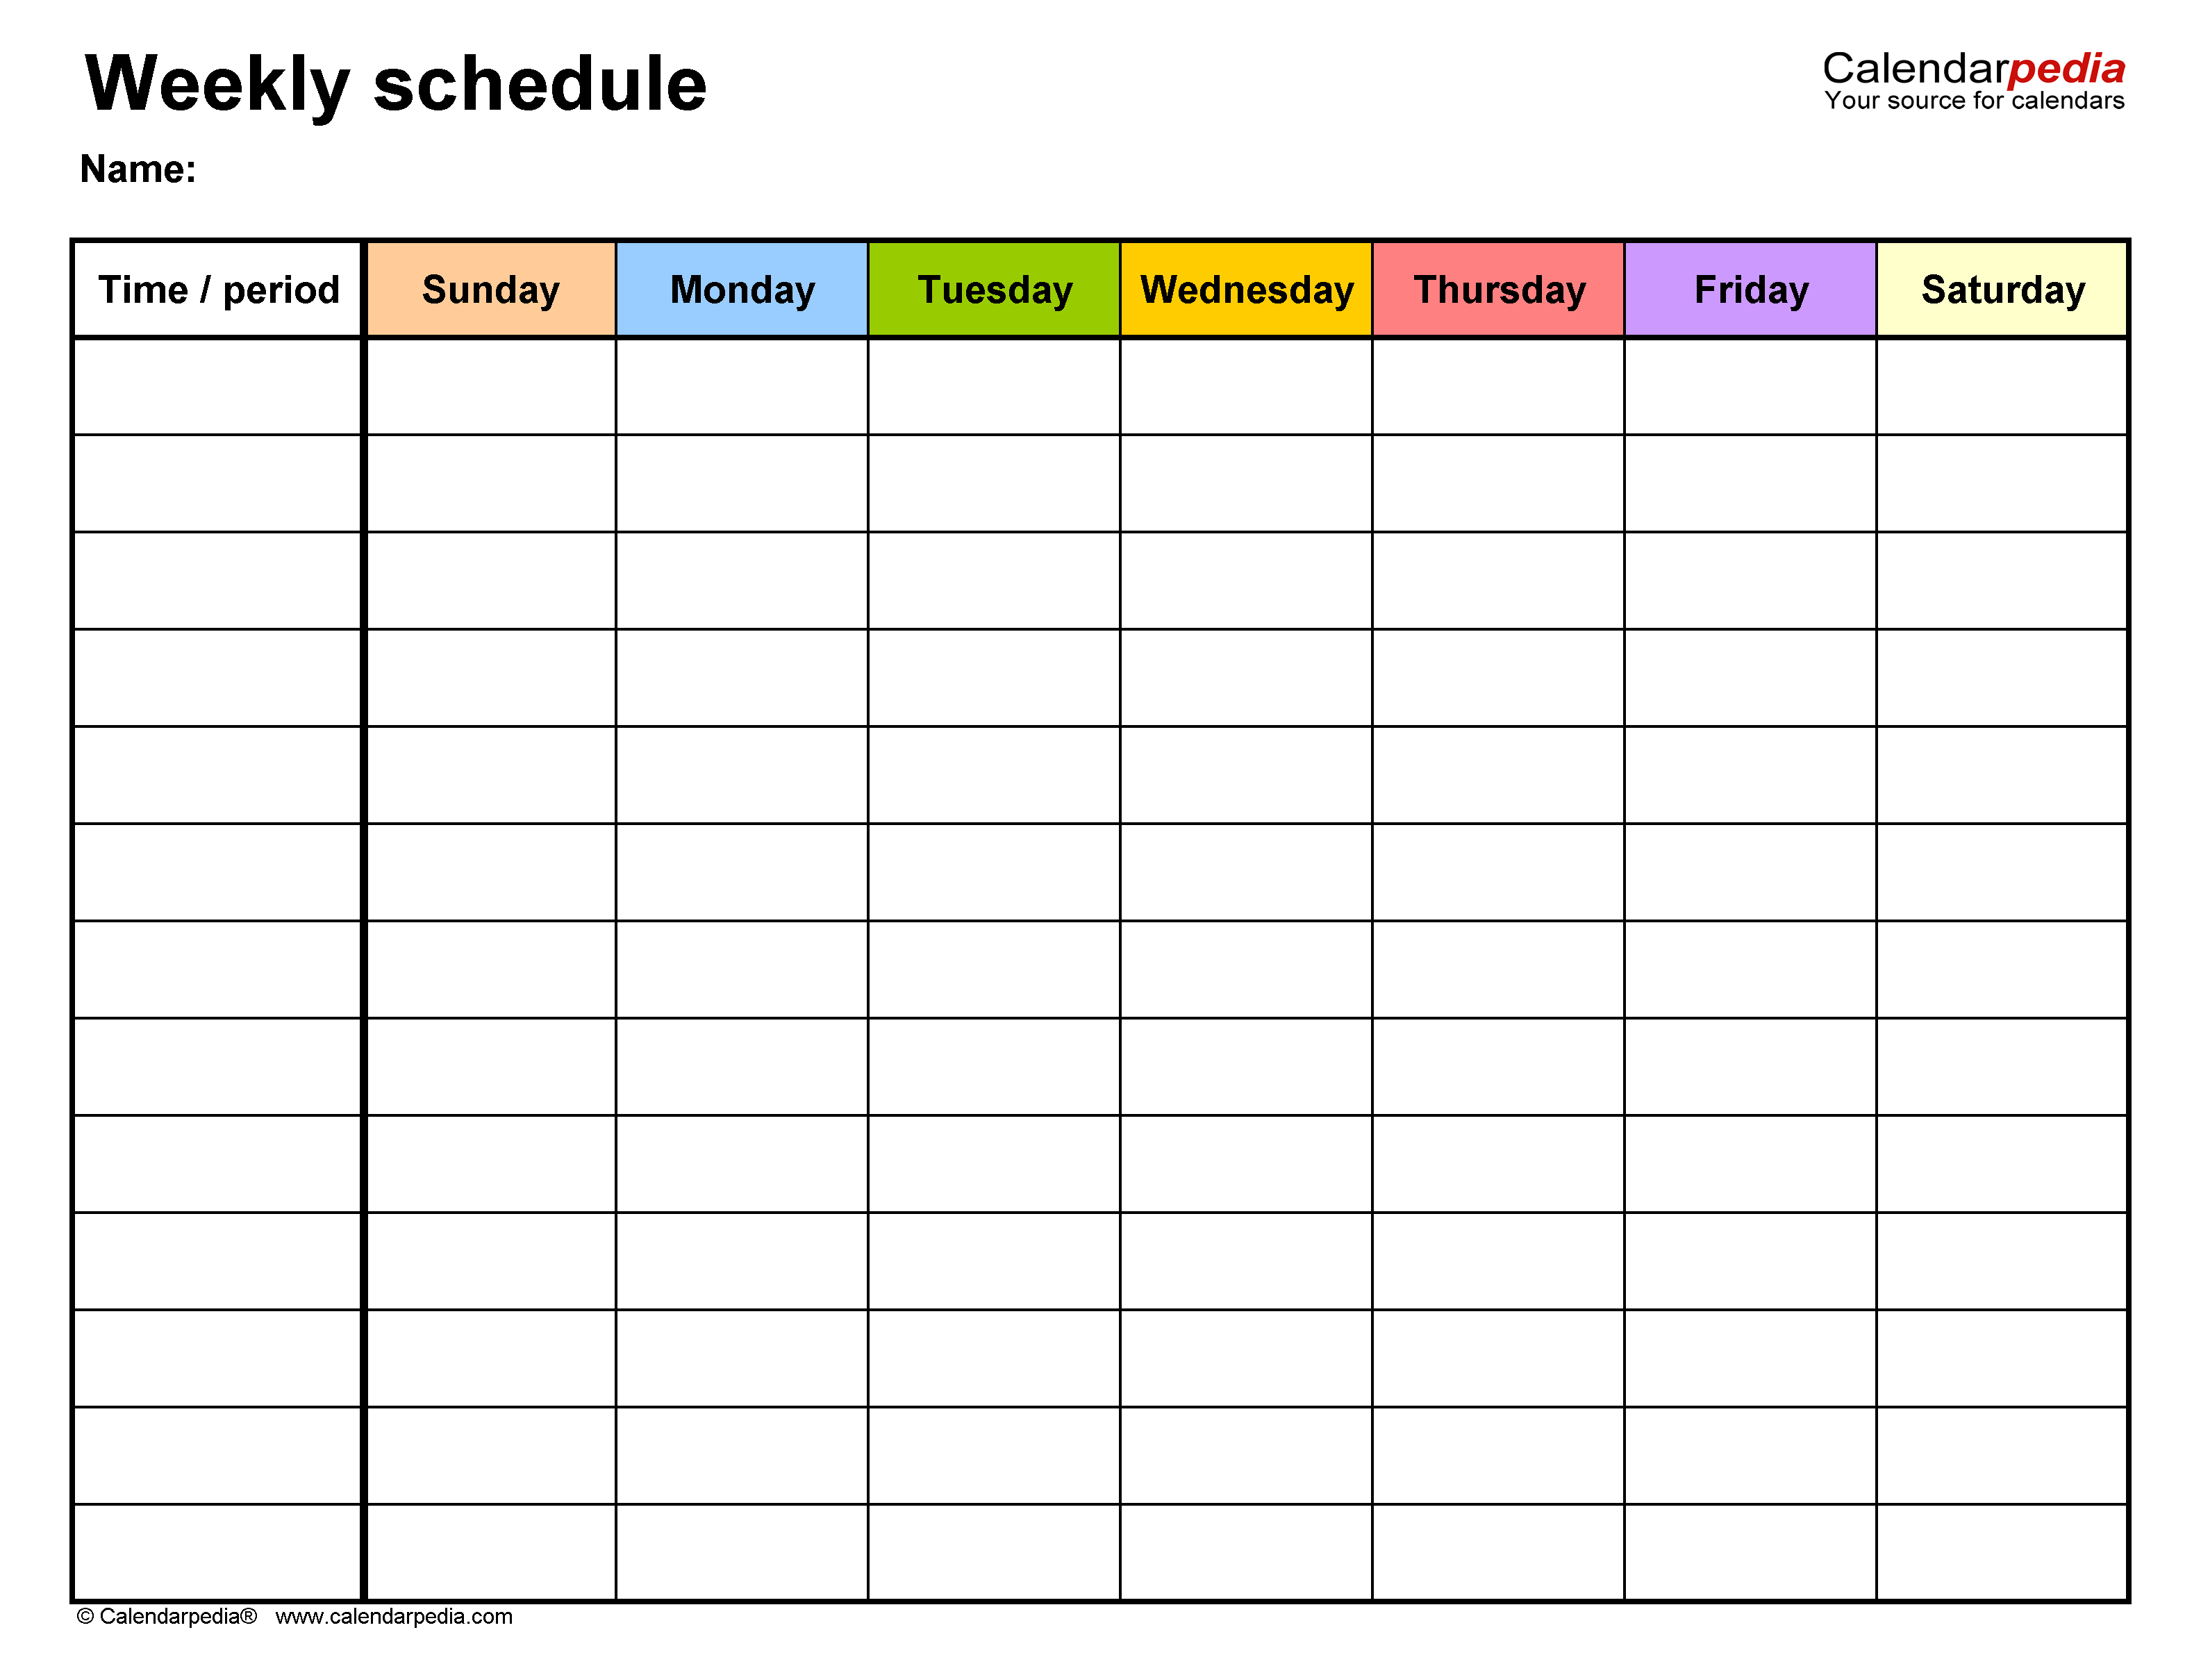 Free Weekly Schedules for Word - 10 Templates Intended For Blank Monthly Work Schedule Template